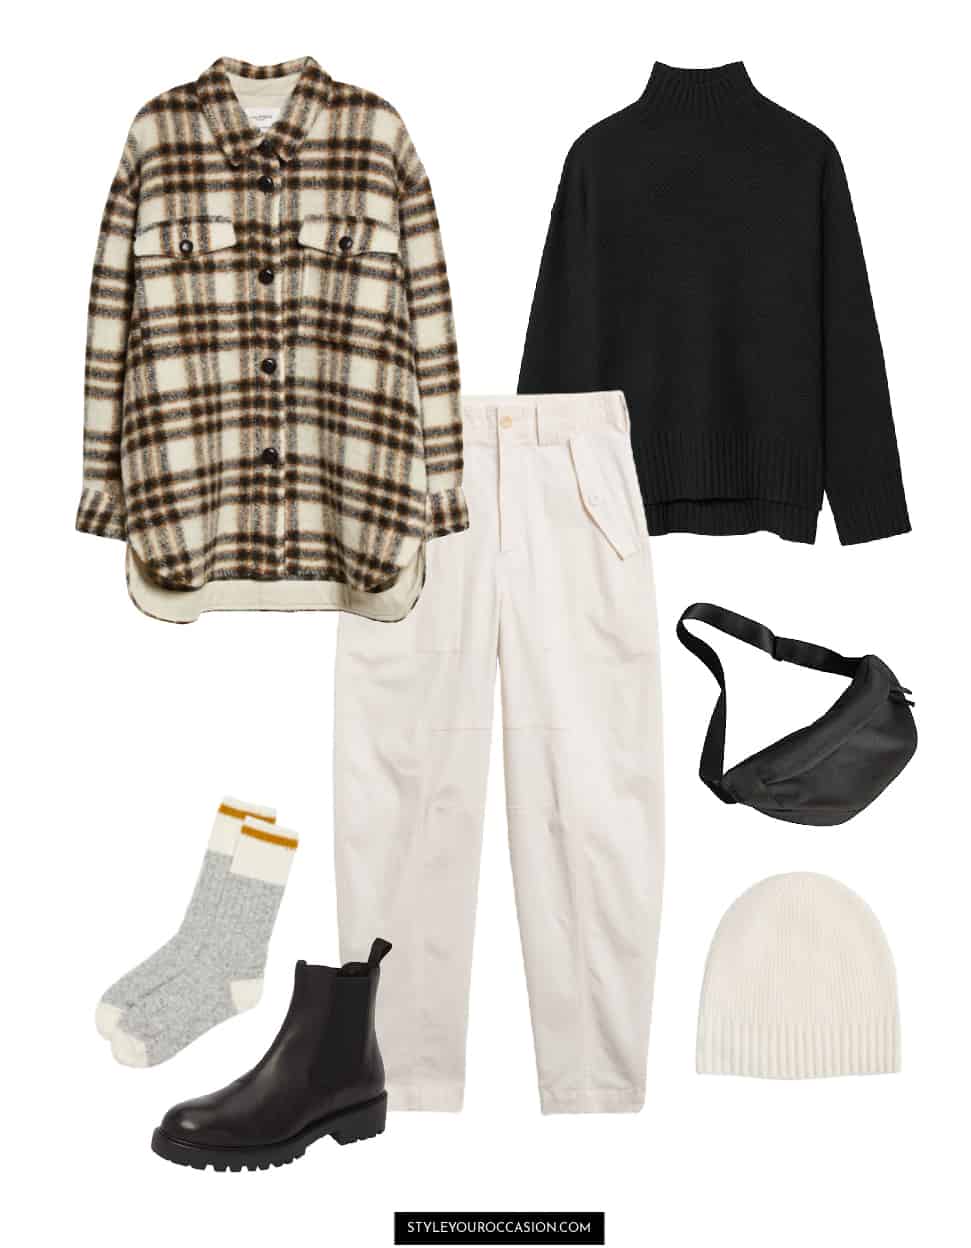 image of an outfit with a plaid shirt jacket, black turtleneck, ivory utility pants, black boots, and an ivory beanie